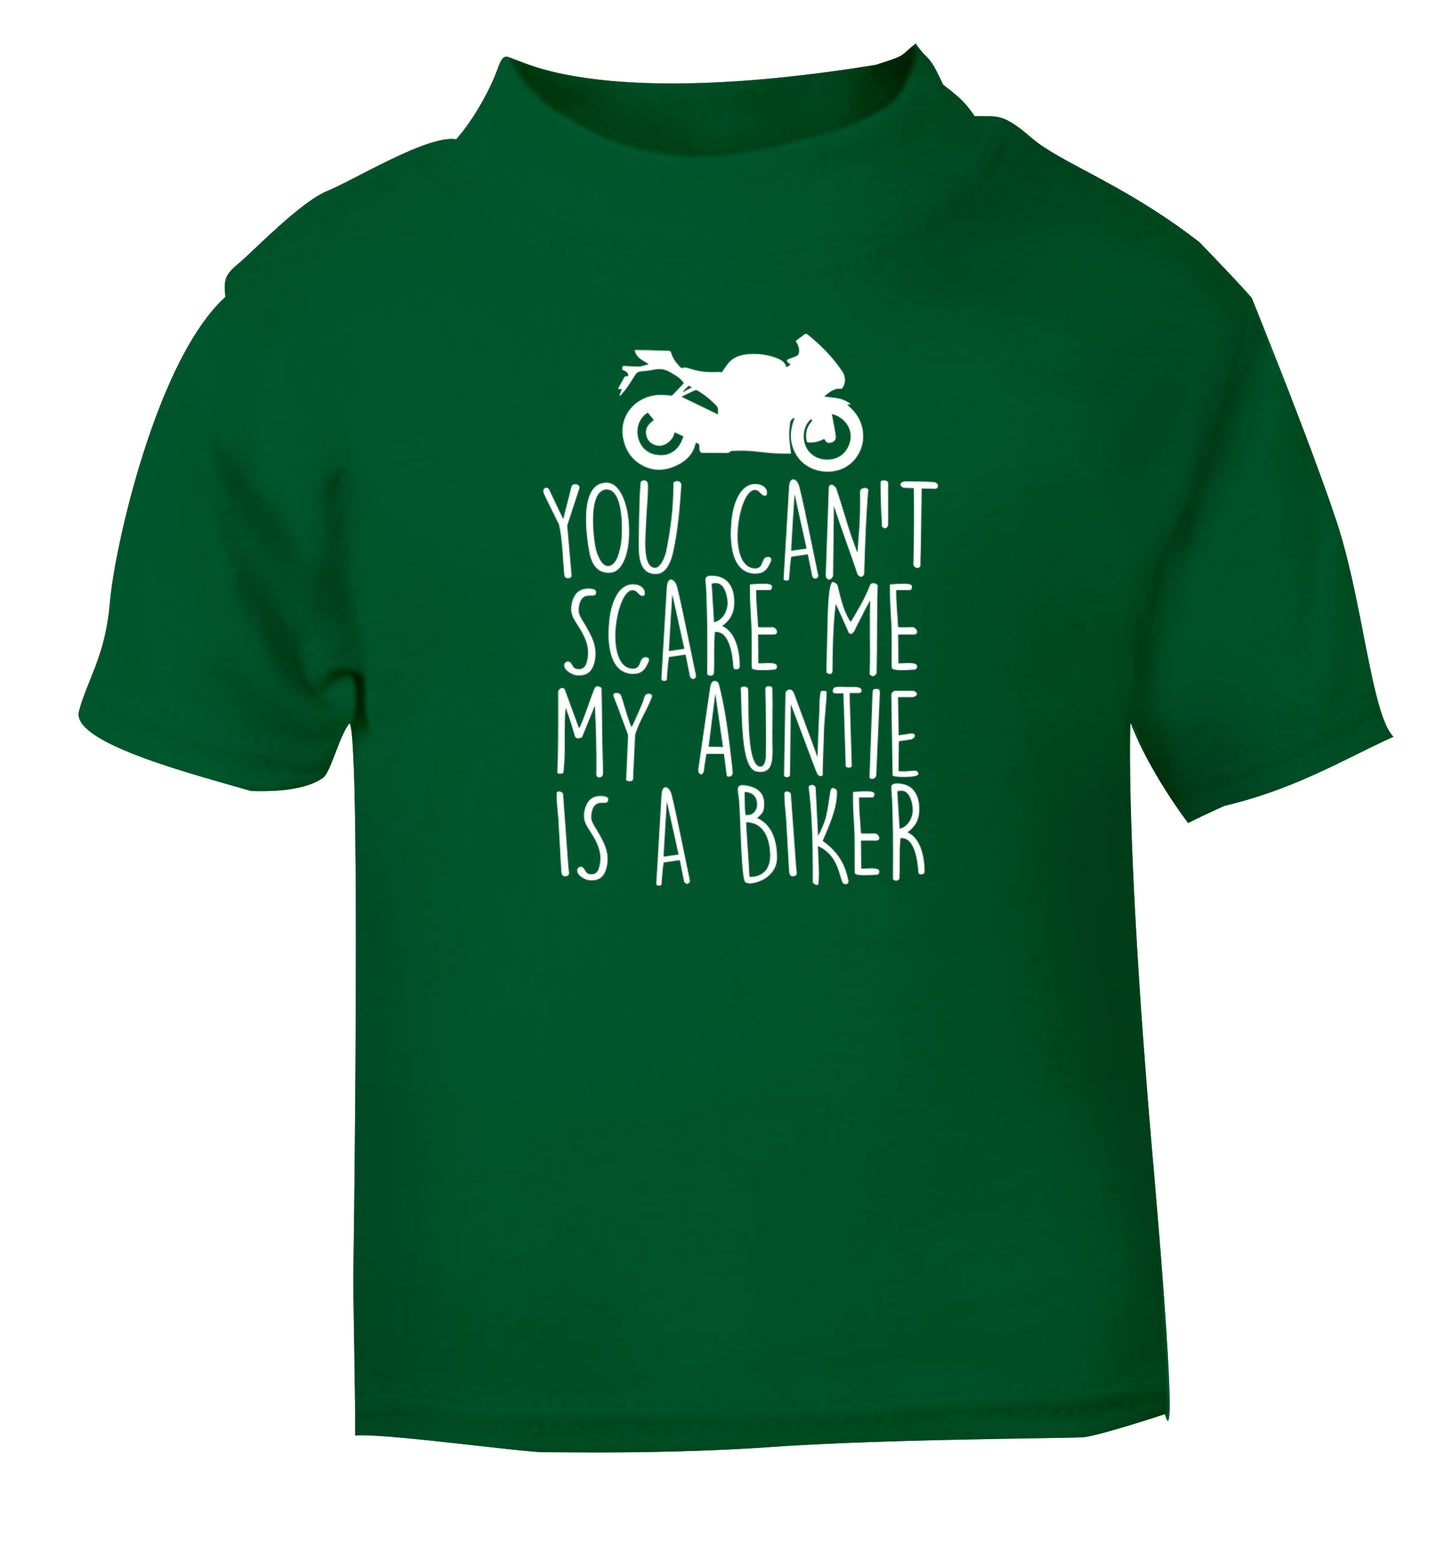 You can't scare me my auntie is a biker green Baby Toddler Tshirt 2 Years